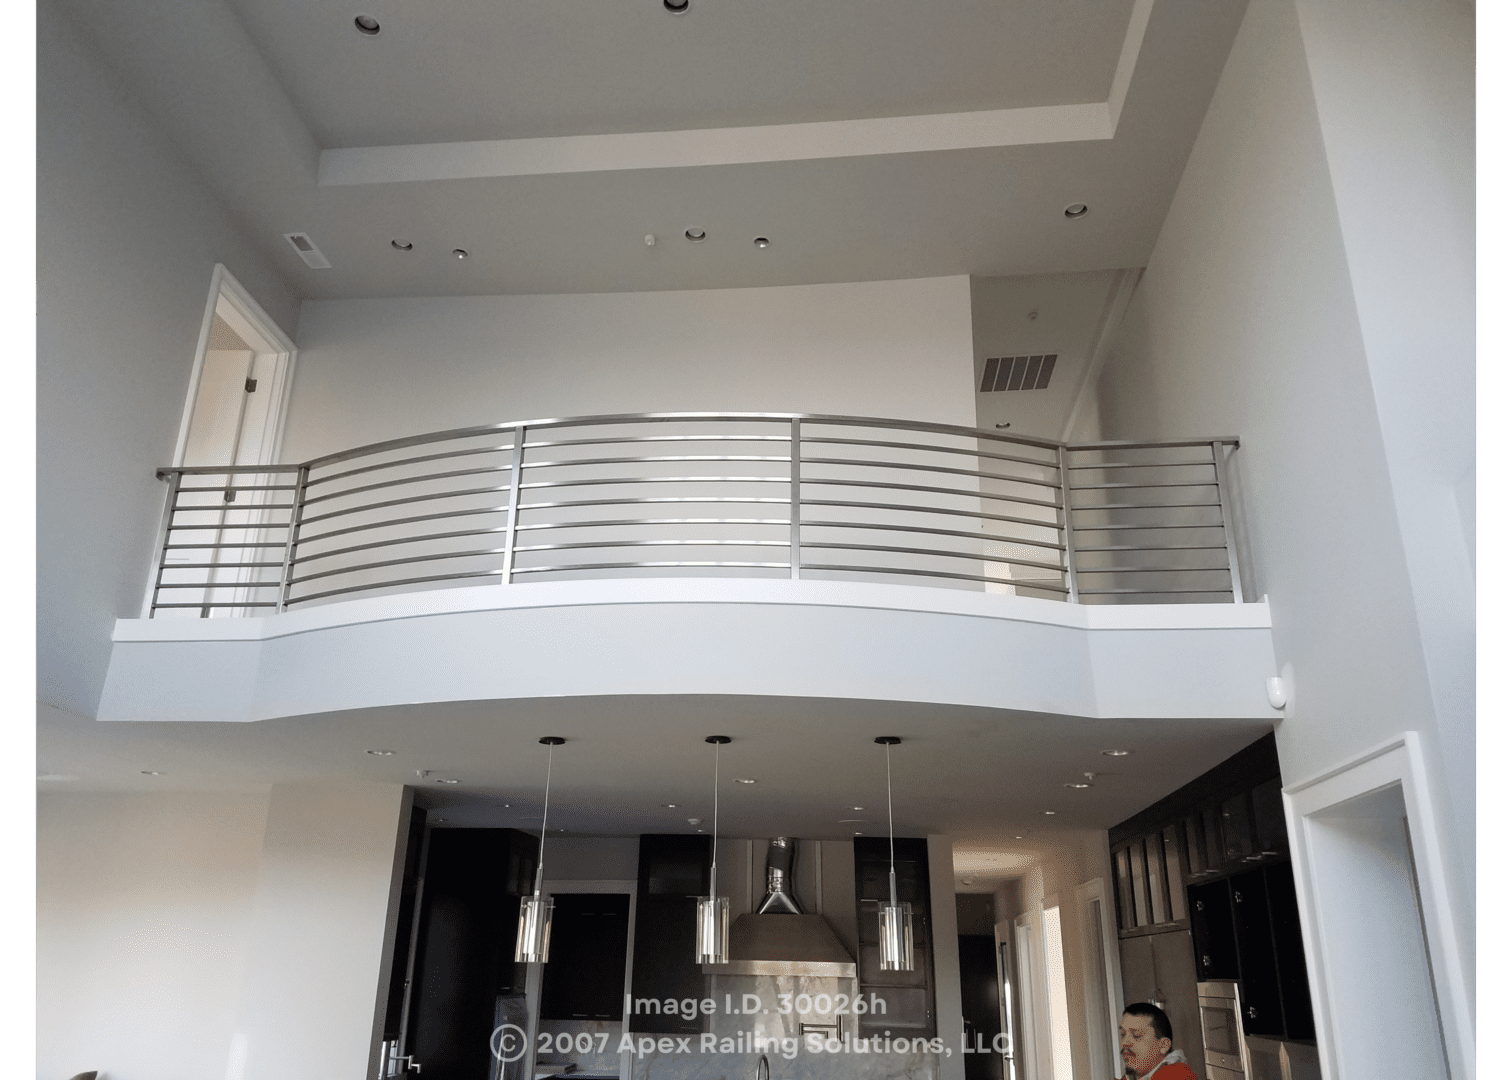 Interior home railings made from curved steel for a balcony